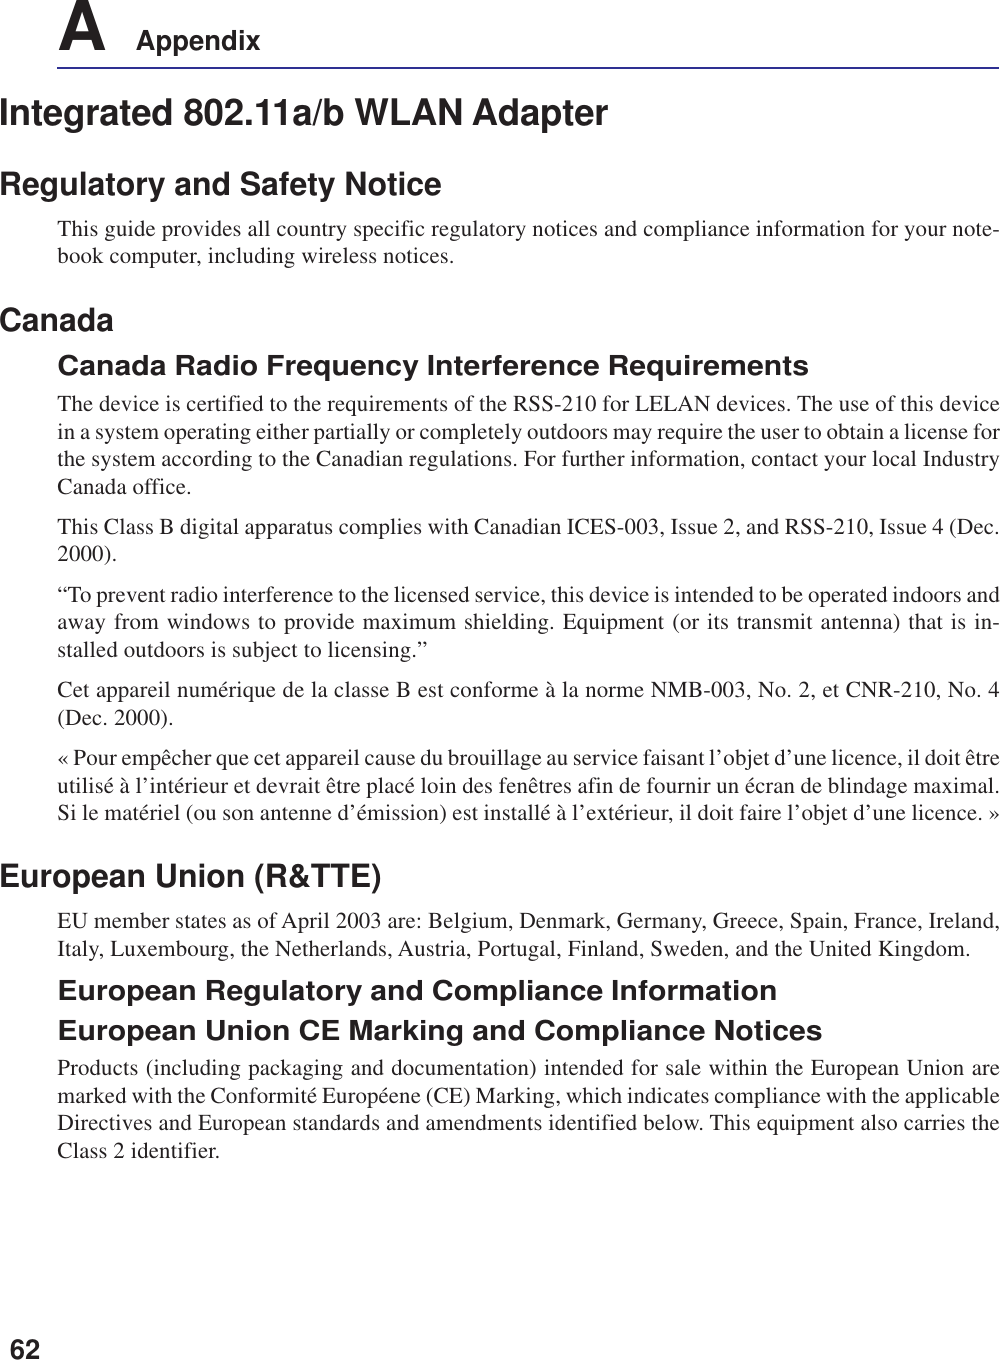 62A    AppendixIntegrated 802.11a/b WLAN AdapterRegulatory and Safety NoticeThis guide provides all country specific regulatory notices and compliance information for your note-book computer, including wireless notices.CanadaCanada Radio Frequency Interference RequirementsThe device is certified to the requirements of the RSS-210 for LELAN devices. The use of this devicein a system operating either partially or completely outdoors may require the user to obtain a license forthe system according to the Canadian regulations. For further information, contact your local IndustryCanada office.This Class B digital apparatus complies with Canadian ICES-003, Issue 2, and RSS-210, Issue 4 (Dec.2000).“To prevent radio interference to the licensed service, this device is intended to be operated indoors andaway from windows to provide maximum shielding. Equipment (or its transmit antenna) that is in-stalled outdoors is subject to licensing.”Cet appareil numérique de la classe B est conforme à la norme NMB-003, No. 2, et CNR-210, No. 4(Dec. 2000).« Pour empêcher que cet appareil cause du brouillage au service faisant l’objet d’une licence, il doit êtreutilisé à l’intérieur et devrait être placé loin des fenêtres afin de fournir un écran de blindage maximal.Si le matériel (ou son antenne d’émission) est installé à l’extérieur, il doit faire l’objet d’une licence. »European Union (R&amp;TTE)EU member states as of April 2003 are: Belgium, Denmark, Germany, Greece, Spain, France, Ireland,Italy, Luxembourg, the Netherlands, Austria, Portugal, Finland, Sweden, and the United Kingdom.European Regulatory and Compliance InformationEuropean Union CE Marking and Compliance NoticesProducts (including packaging and documentation) intended for sale within the European Union aremarked with the Conformité Européene (CE) Marking, which indicates compliance with the applicableDirectives and European standards and amendments identified below. This equipment also carries theClass 2 identifier.